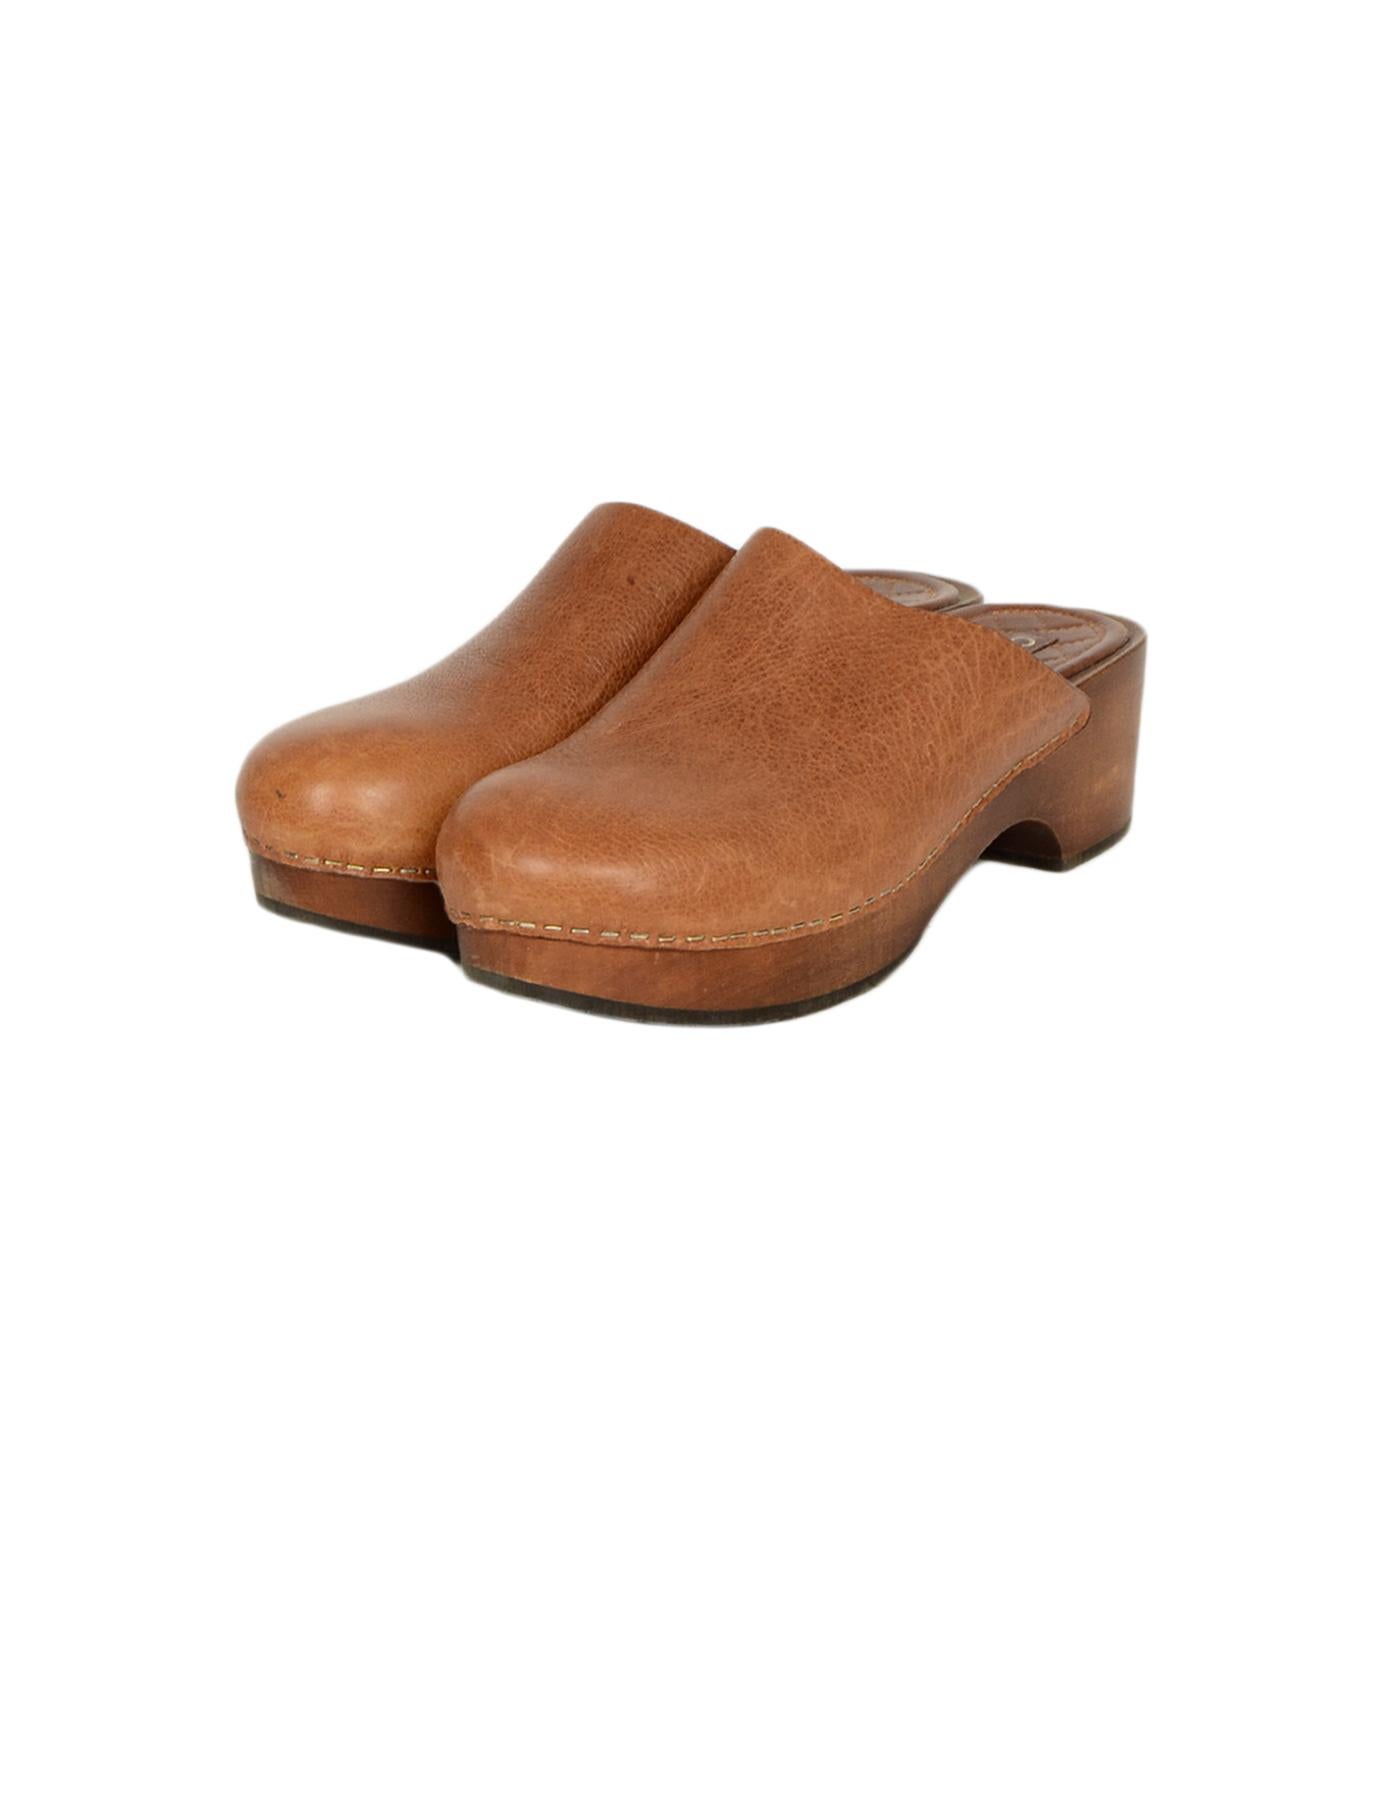 Chanel Tan Leather Clogs with CC

Made In: Italy 
Color: Tan
Hardware: Light Goldtone
Materials: Leather
Closure/Opening: Slip-on
Overall Condition: Very good pre-owned condition, minor scuffs on the exterior (see photos), minow wear on the soles